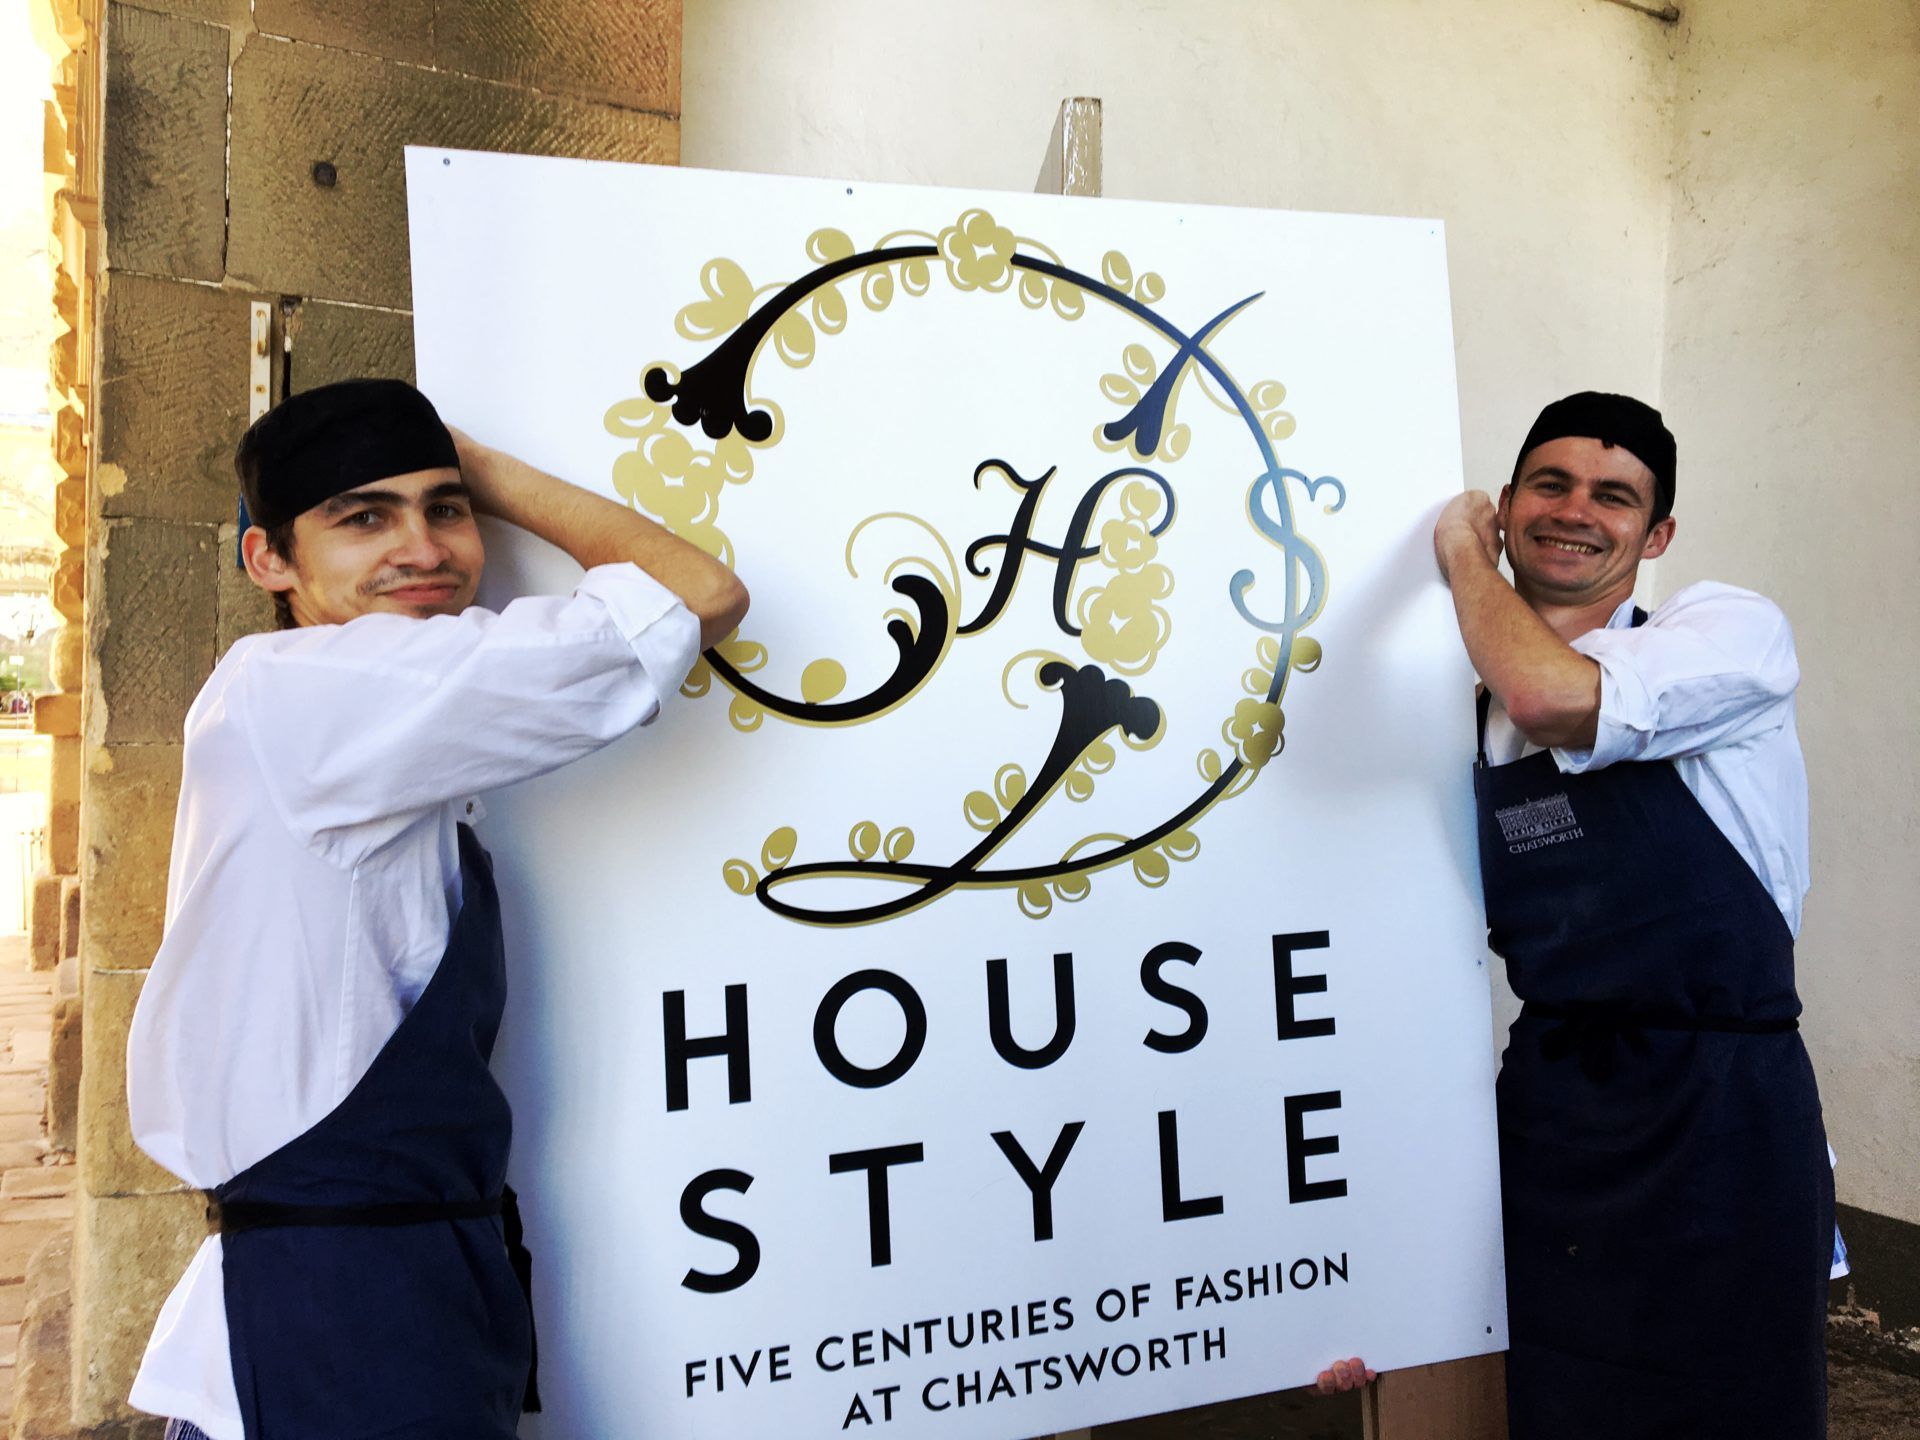 Two of the cafe staff, men in white with black hats and aprons are carrying a sign for the House Style Exhibition